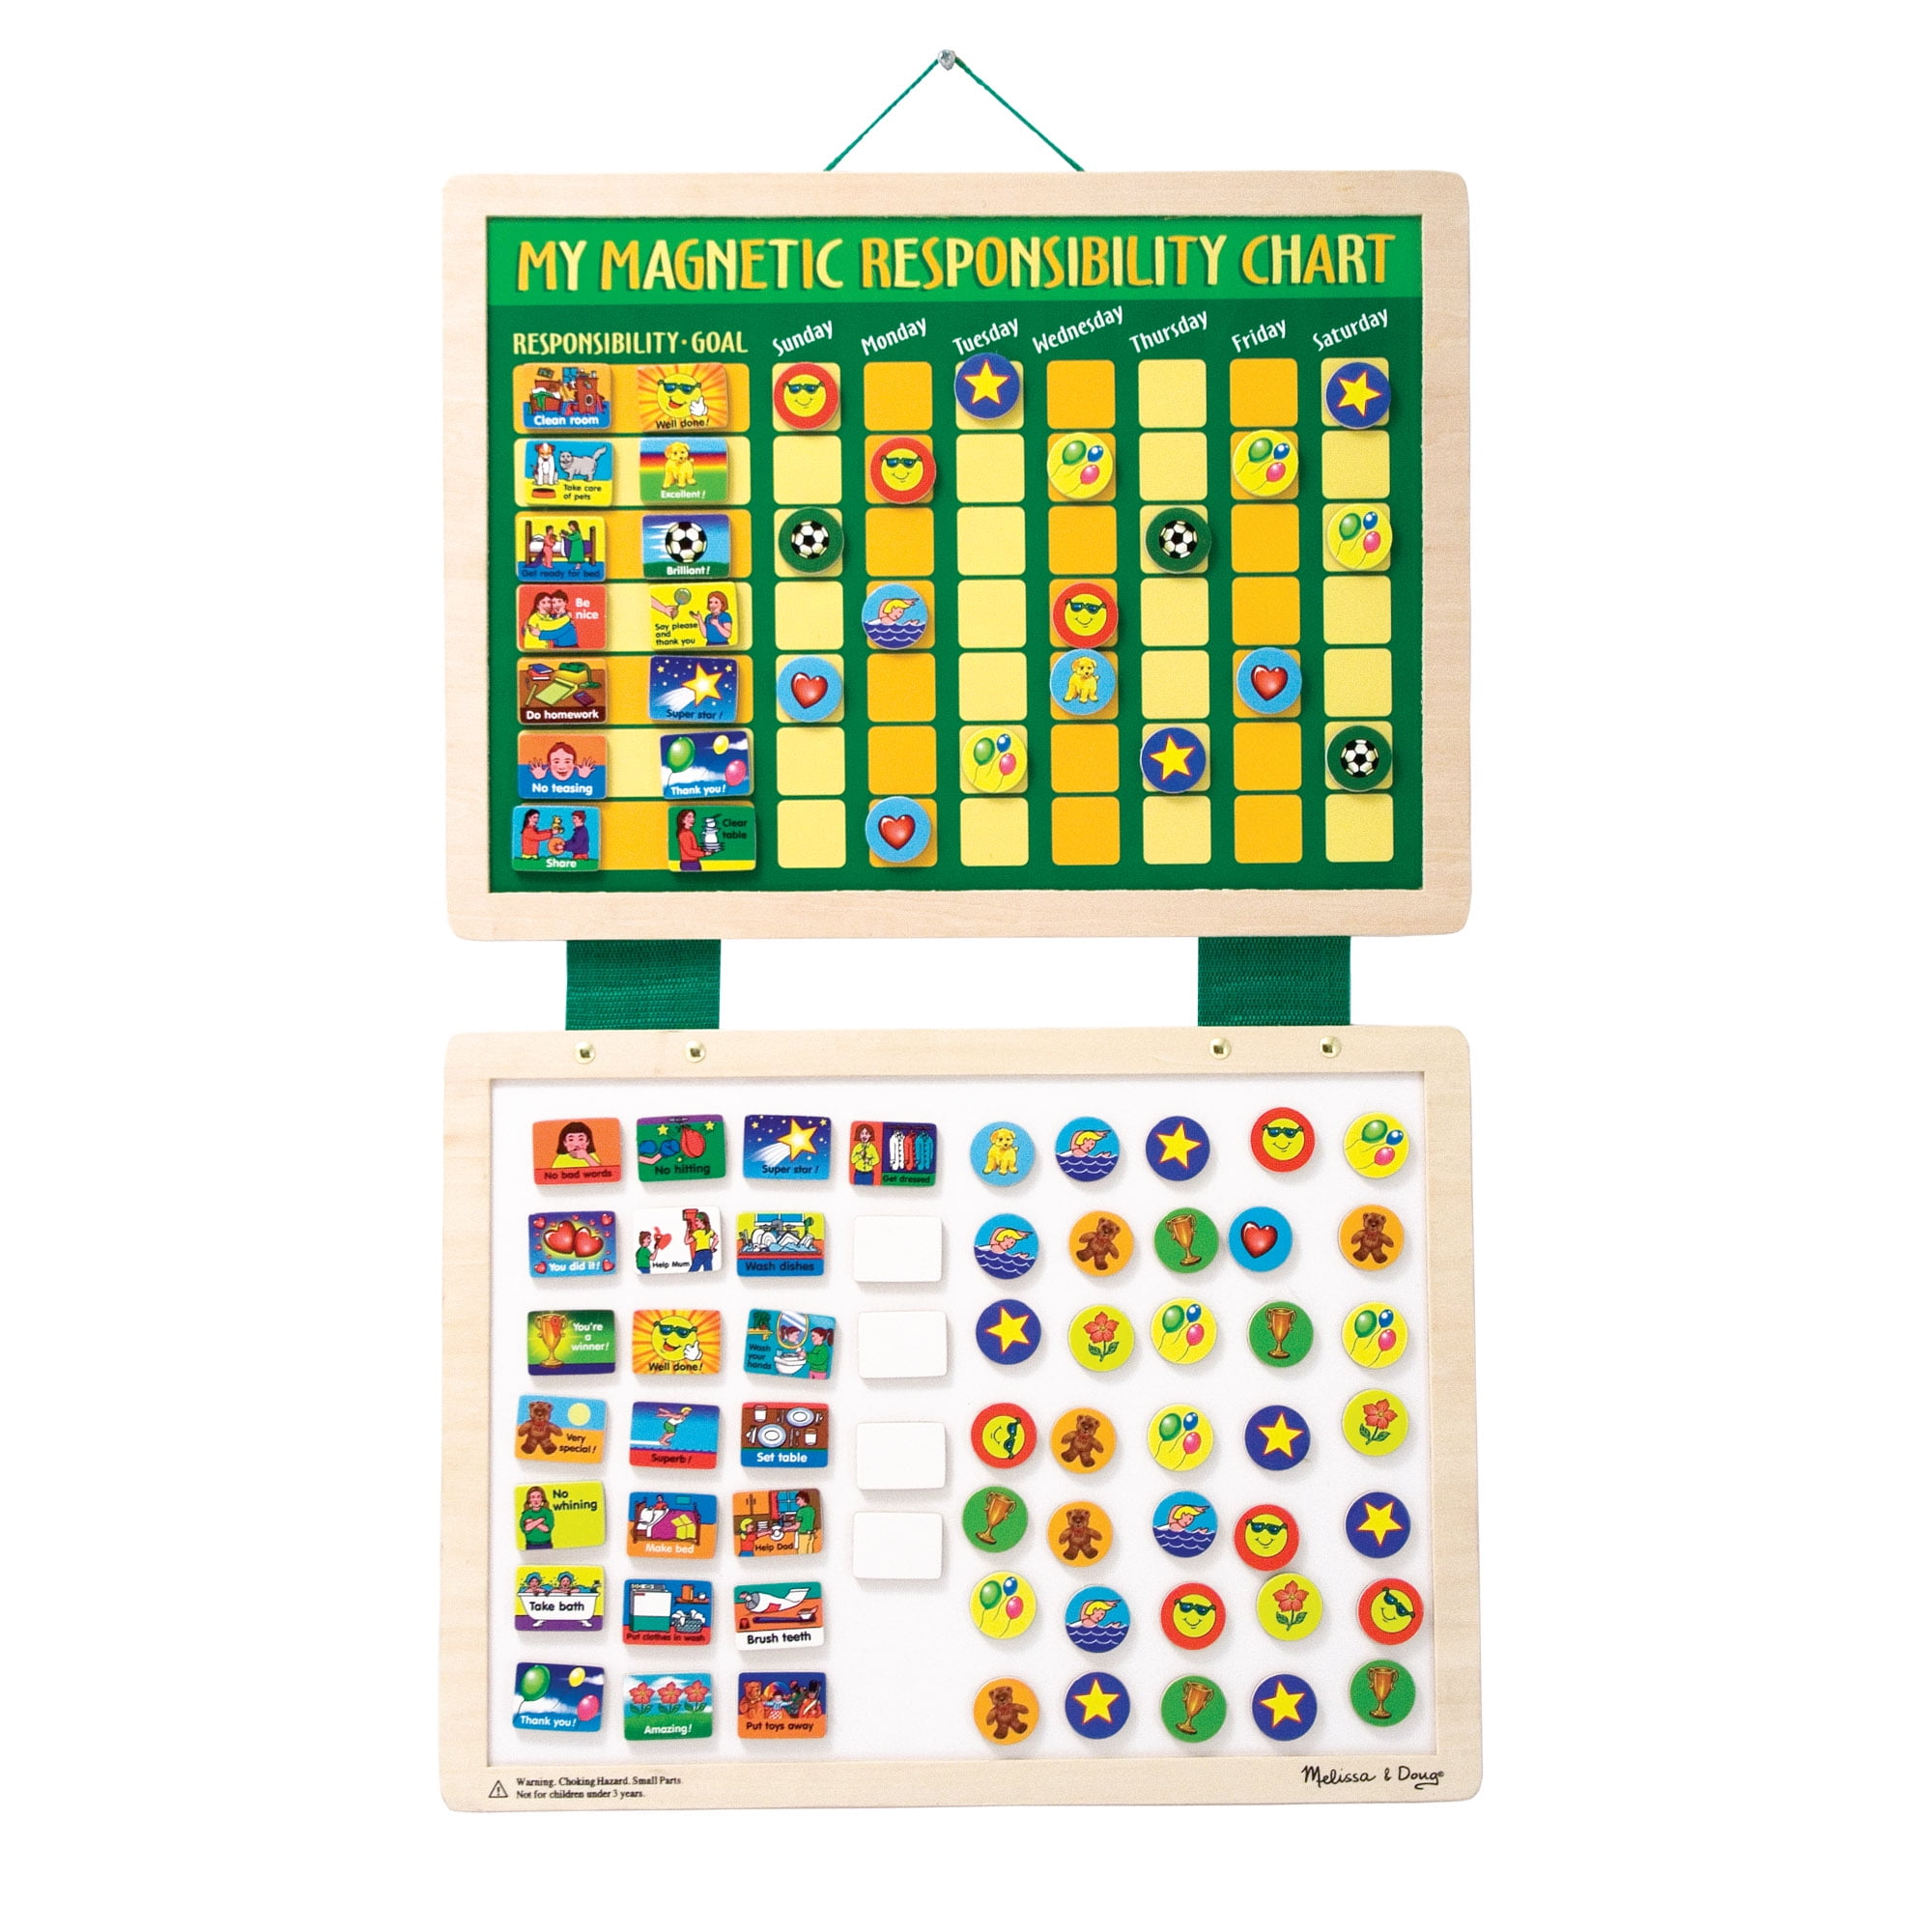 Melissa & Doug Disney Mickey Mouse Clubhouse My Magnetic Responsibility Chart for sale online 